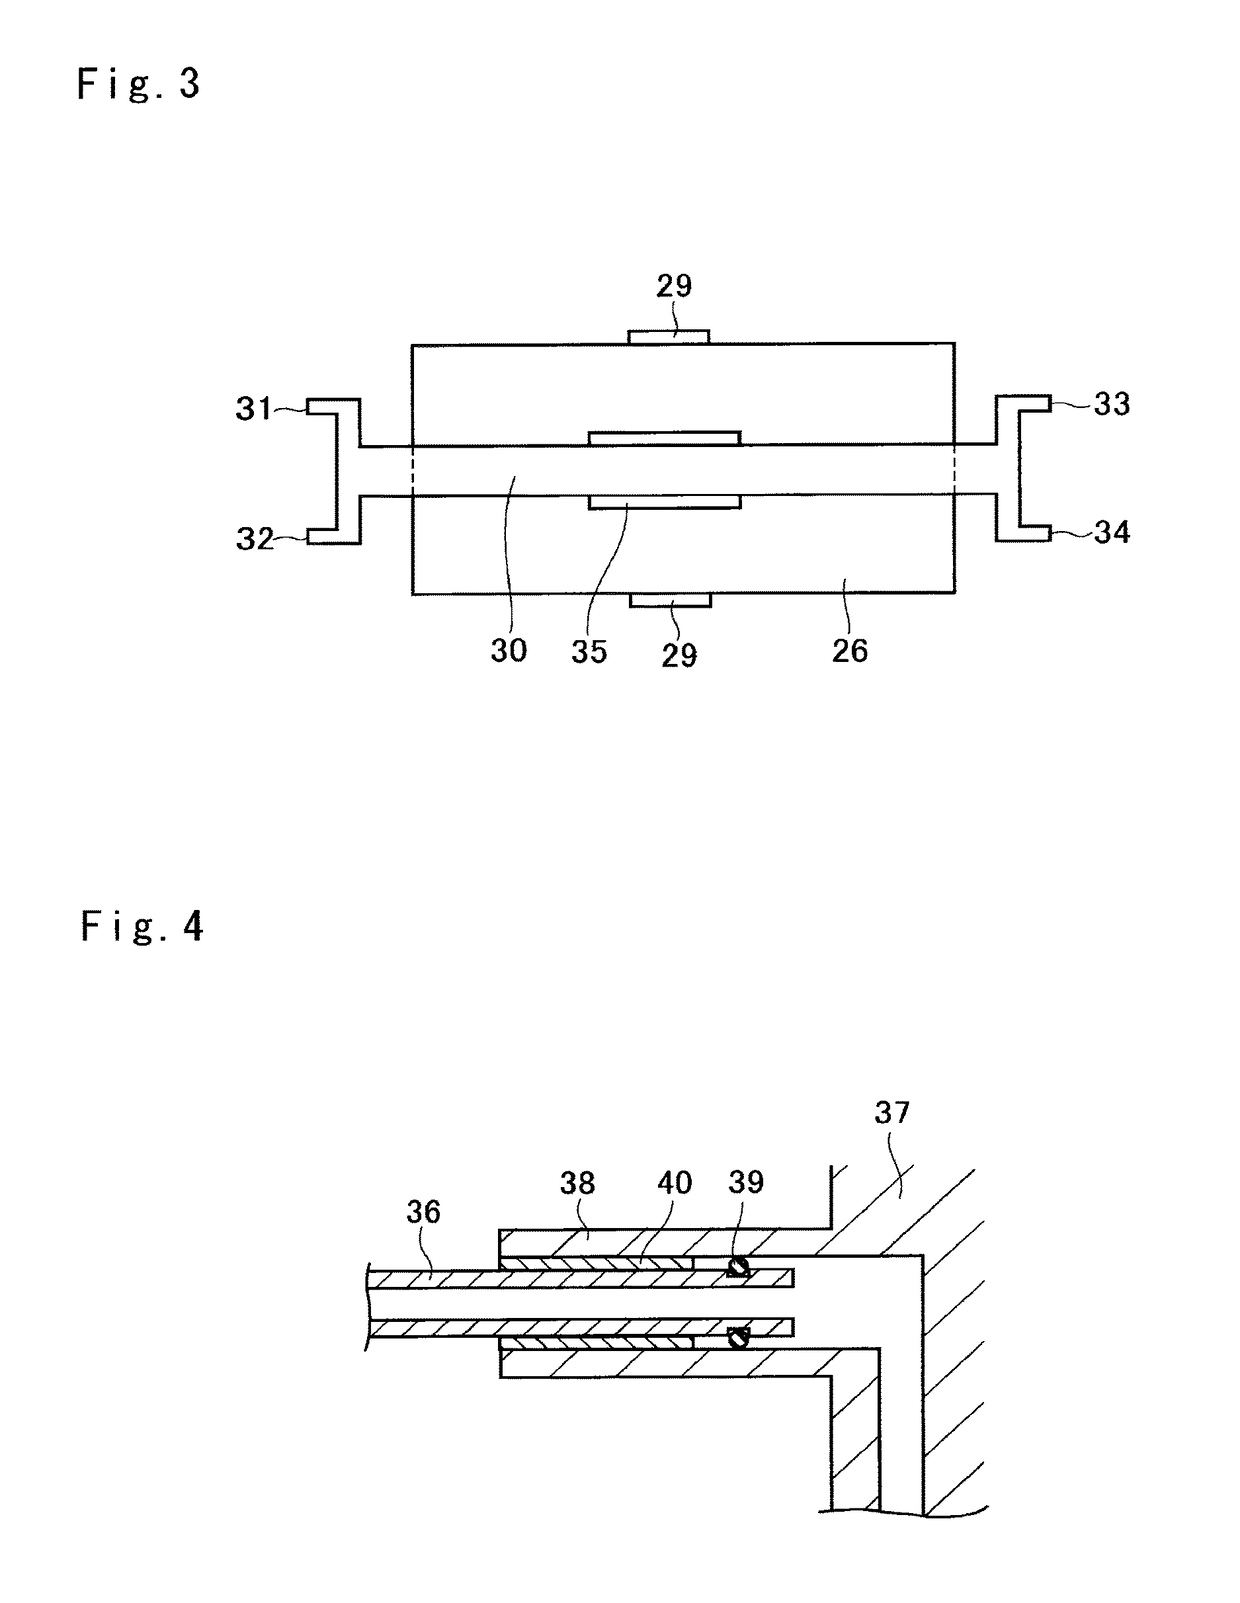 Lubrication device for belt-driven continuously variable transmission